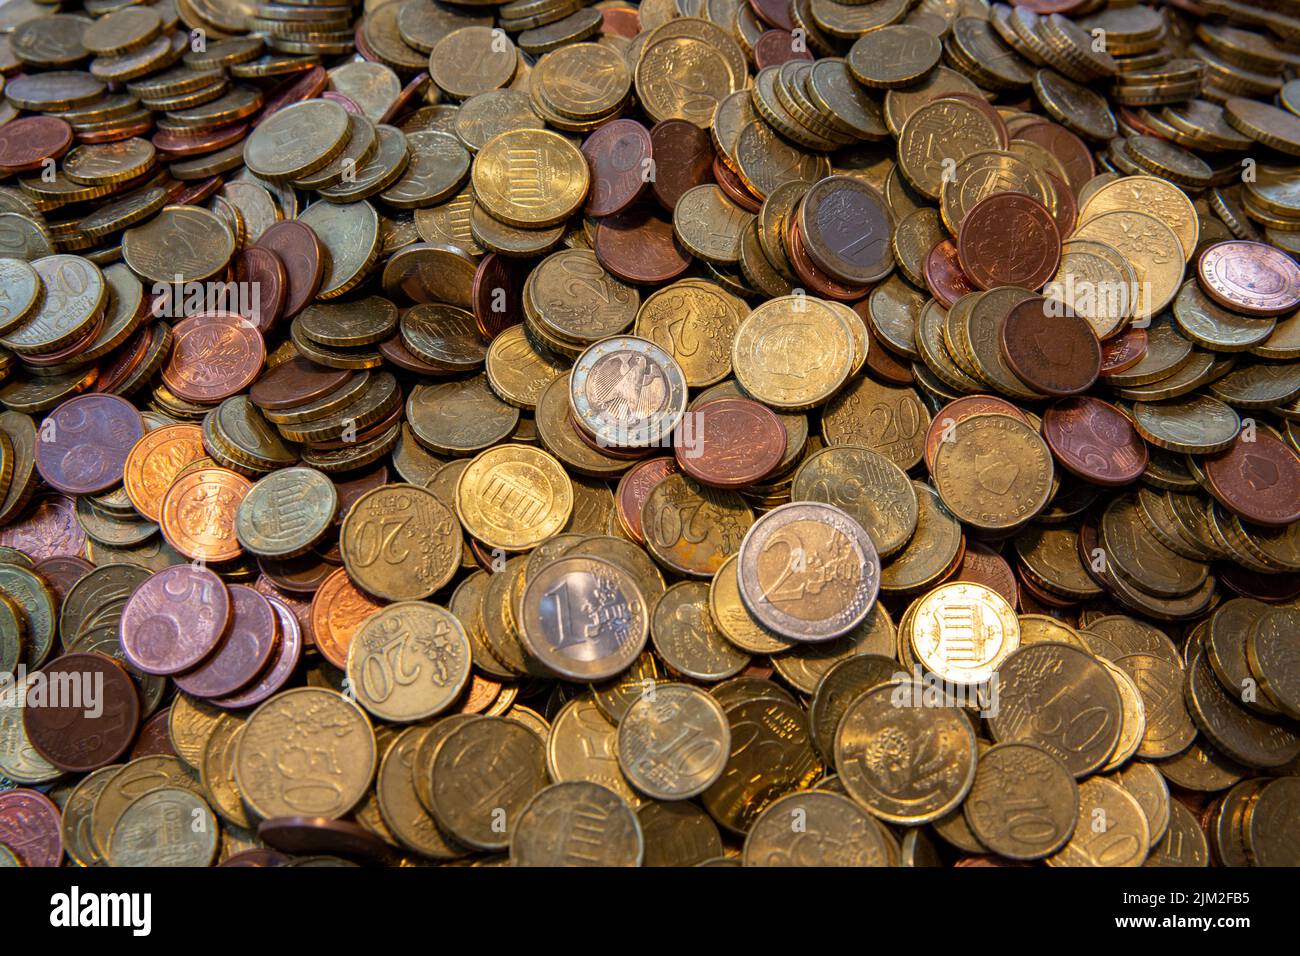 Euro - Cent Coins Full Frame, Collected Coin Money, Savings,Euro, Small Change Stock Photo